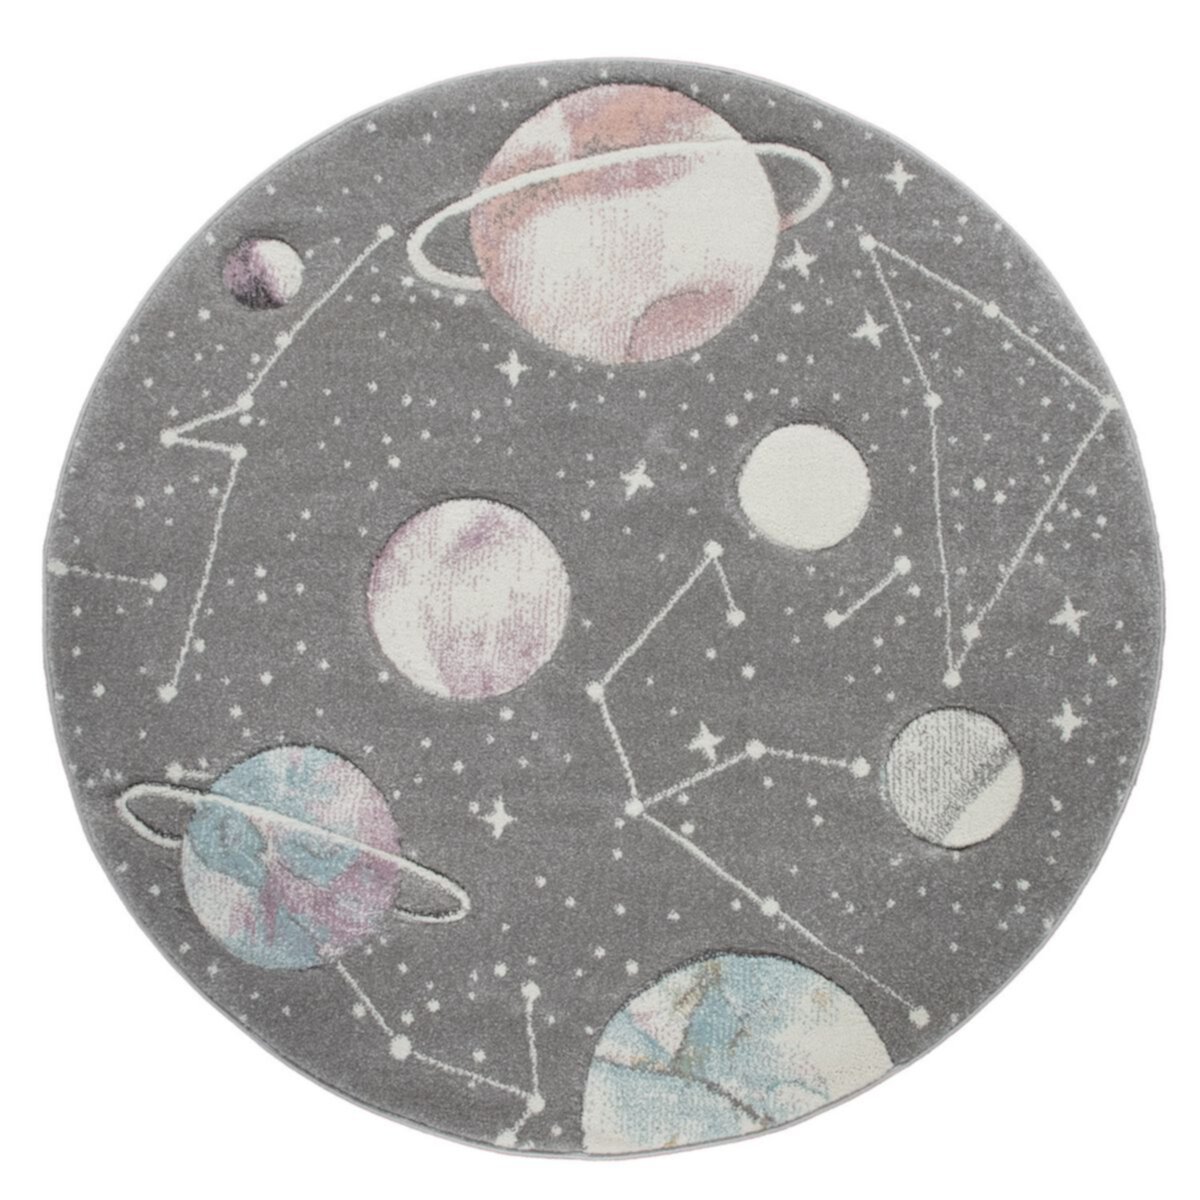 Space Rug for Kids Colorful Galaxy with Planets and Stars in Grey Paco